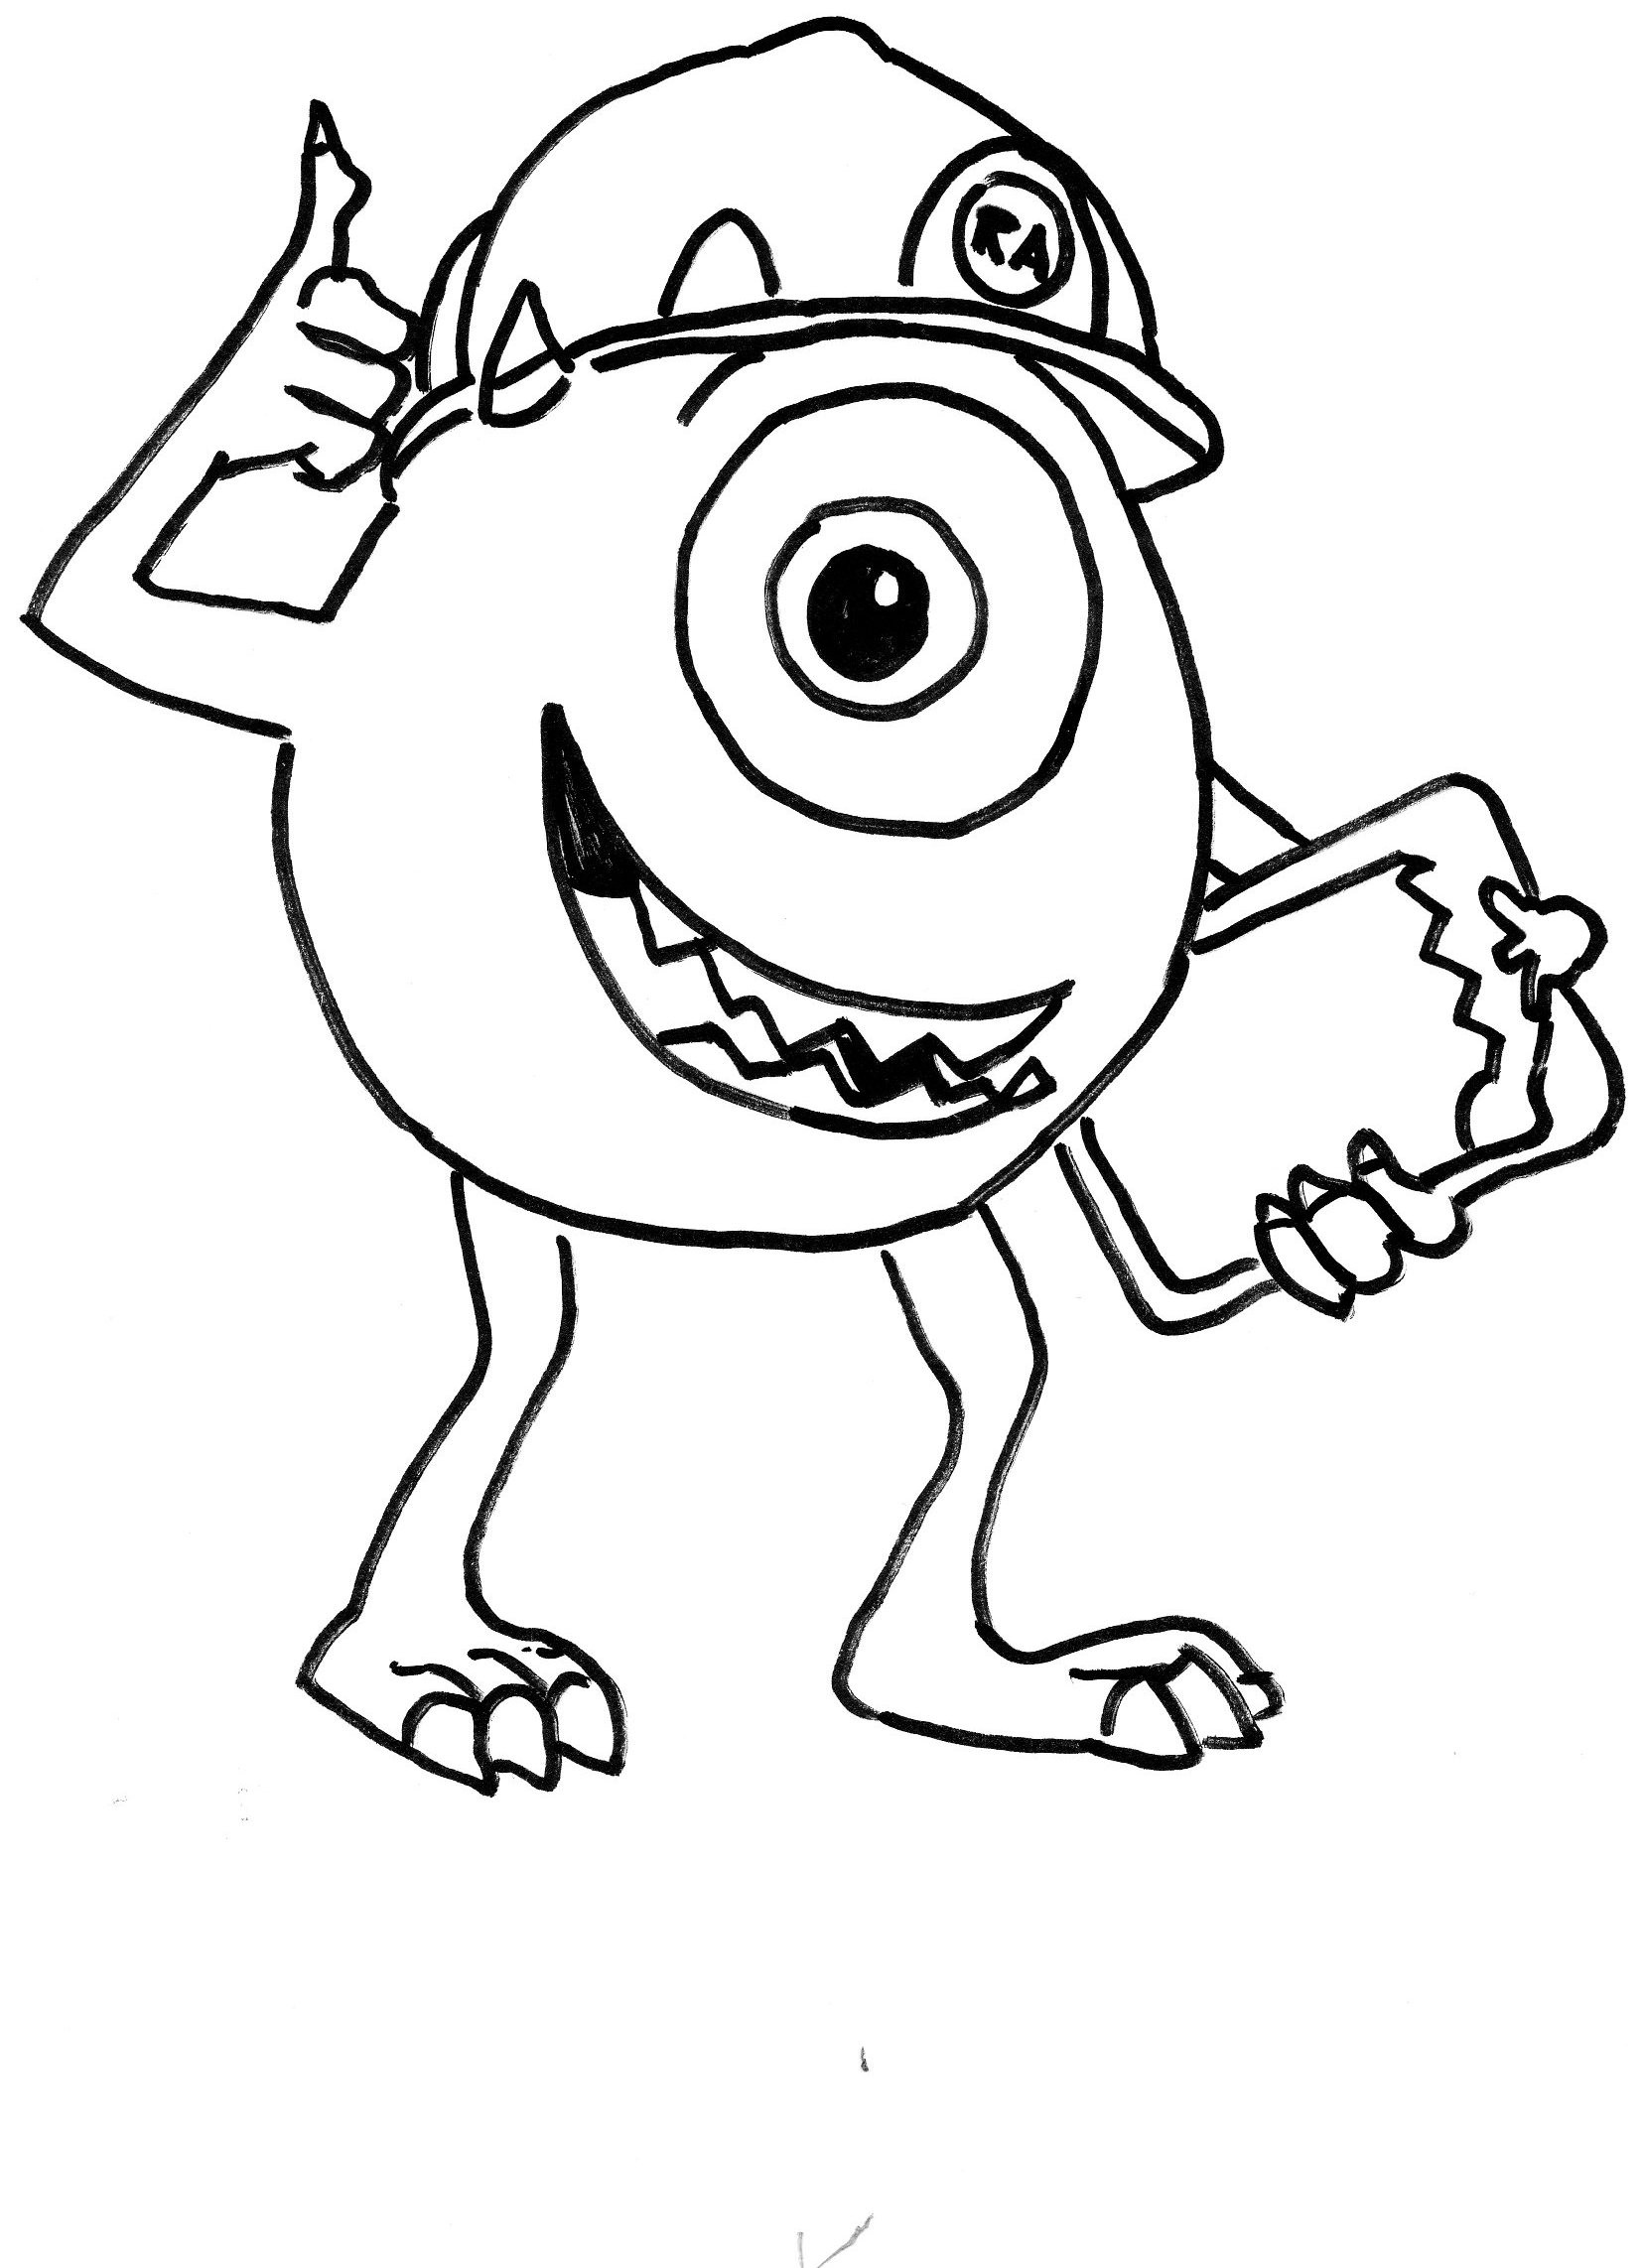 Free Coloring Printable Sheets For Boys
 Coloring Pages for Boys 2018 Dr Odd